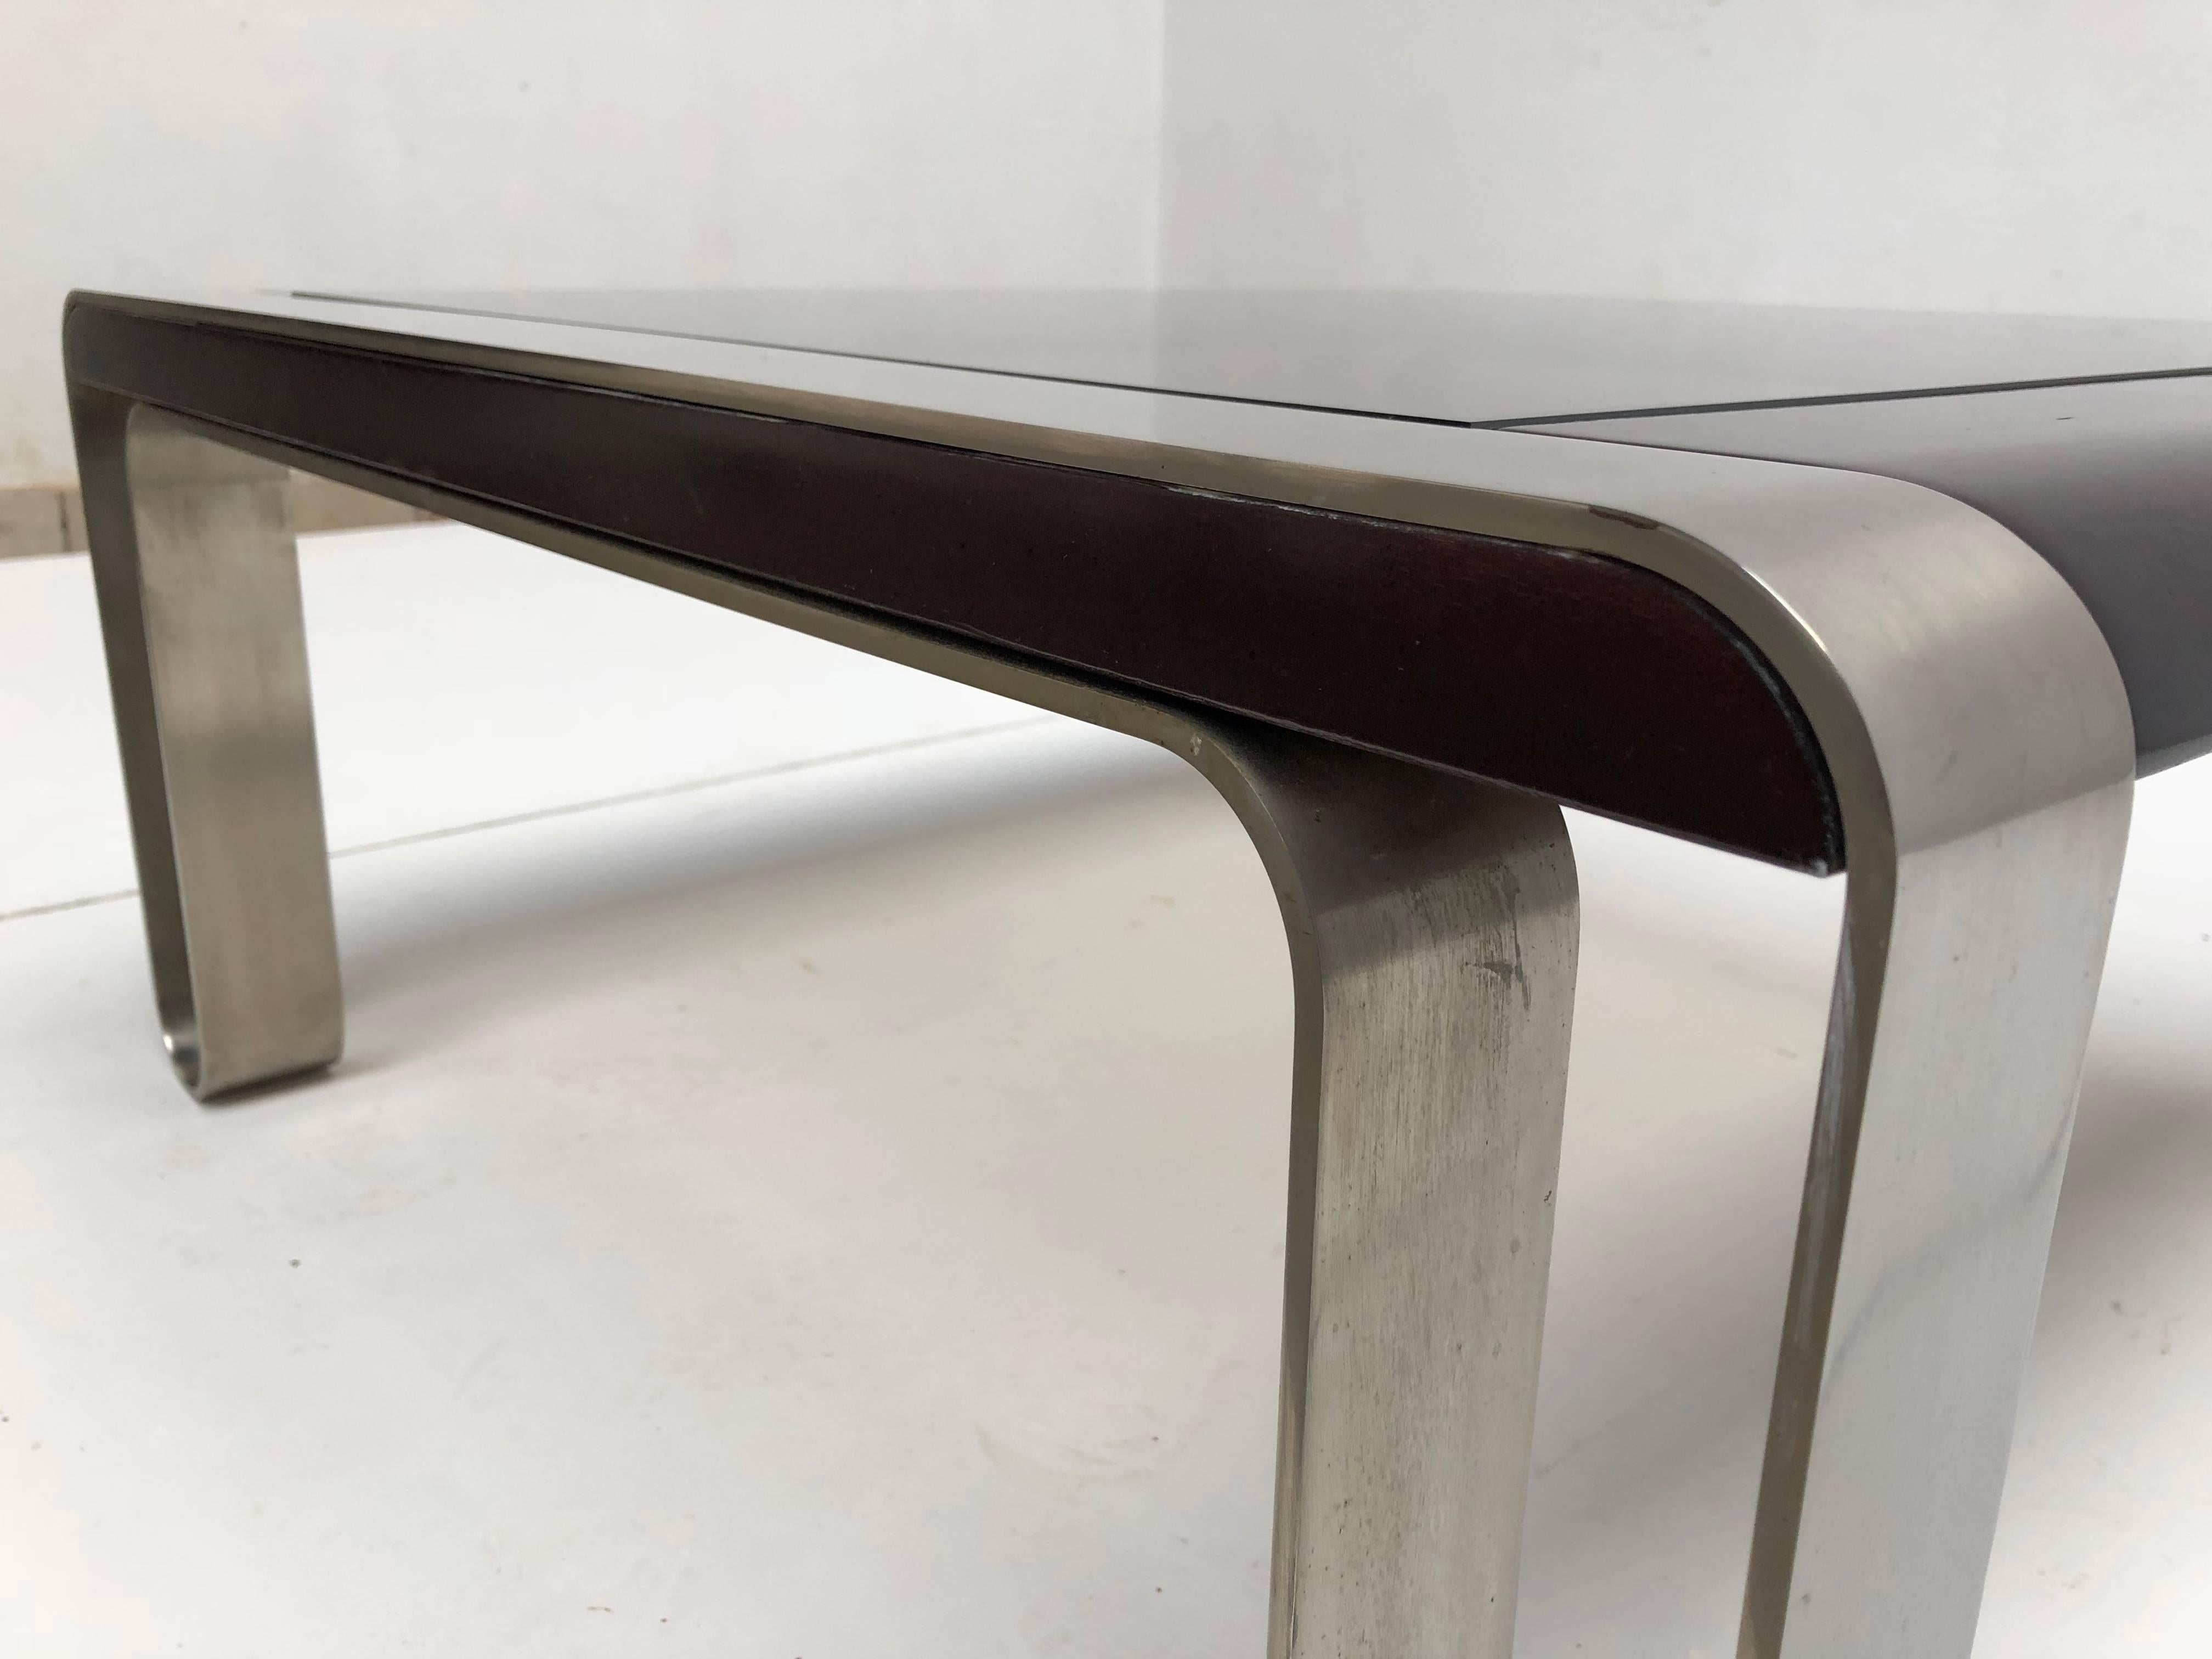 Italian, 1970s Sculptural Coffee or Side Table Nickel-Plated Steel, Wood & Glass For Sale 3